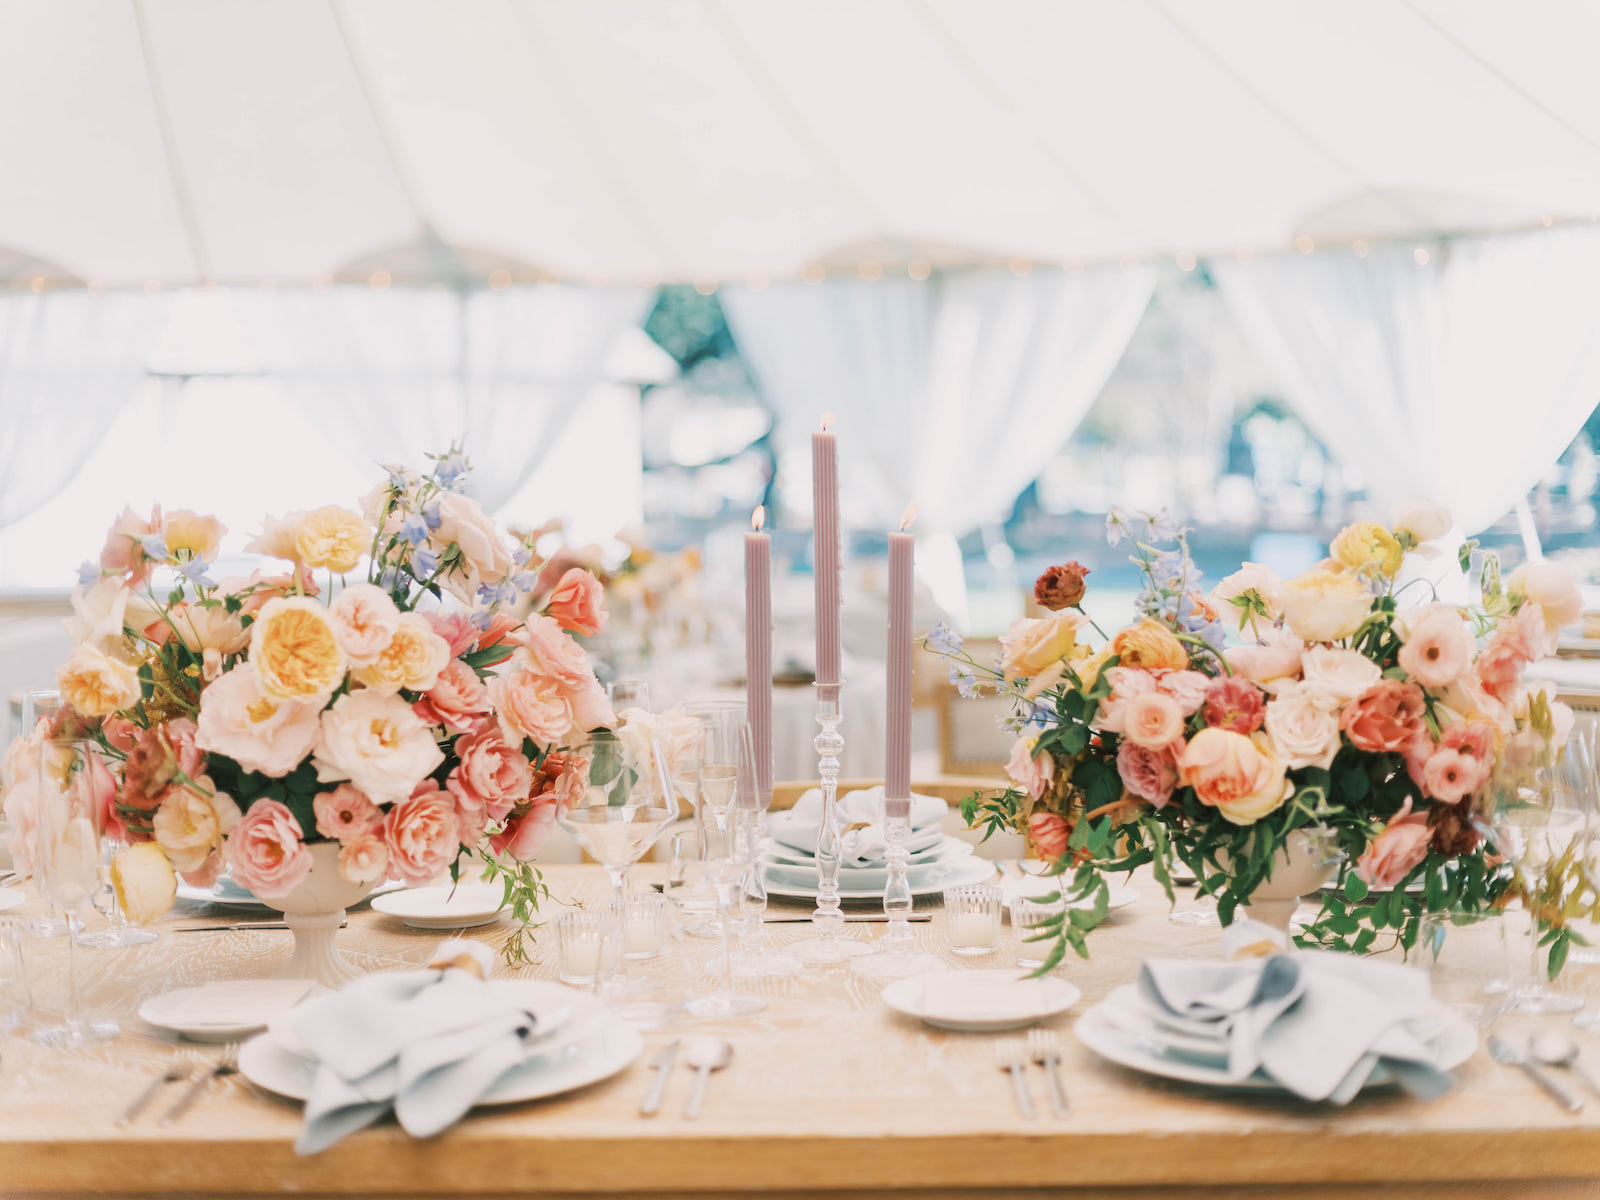 Gorgeous reception place setting in sailcloth tent